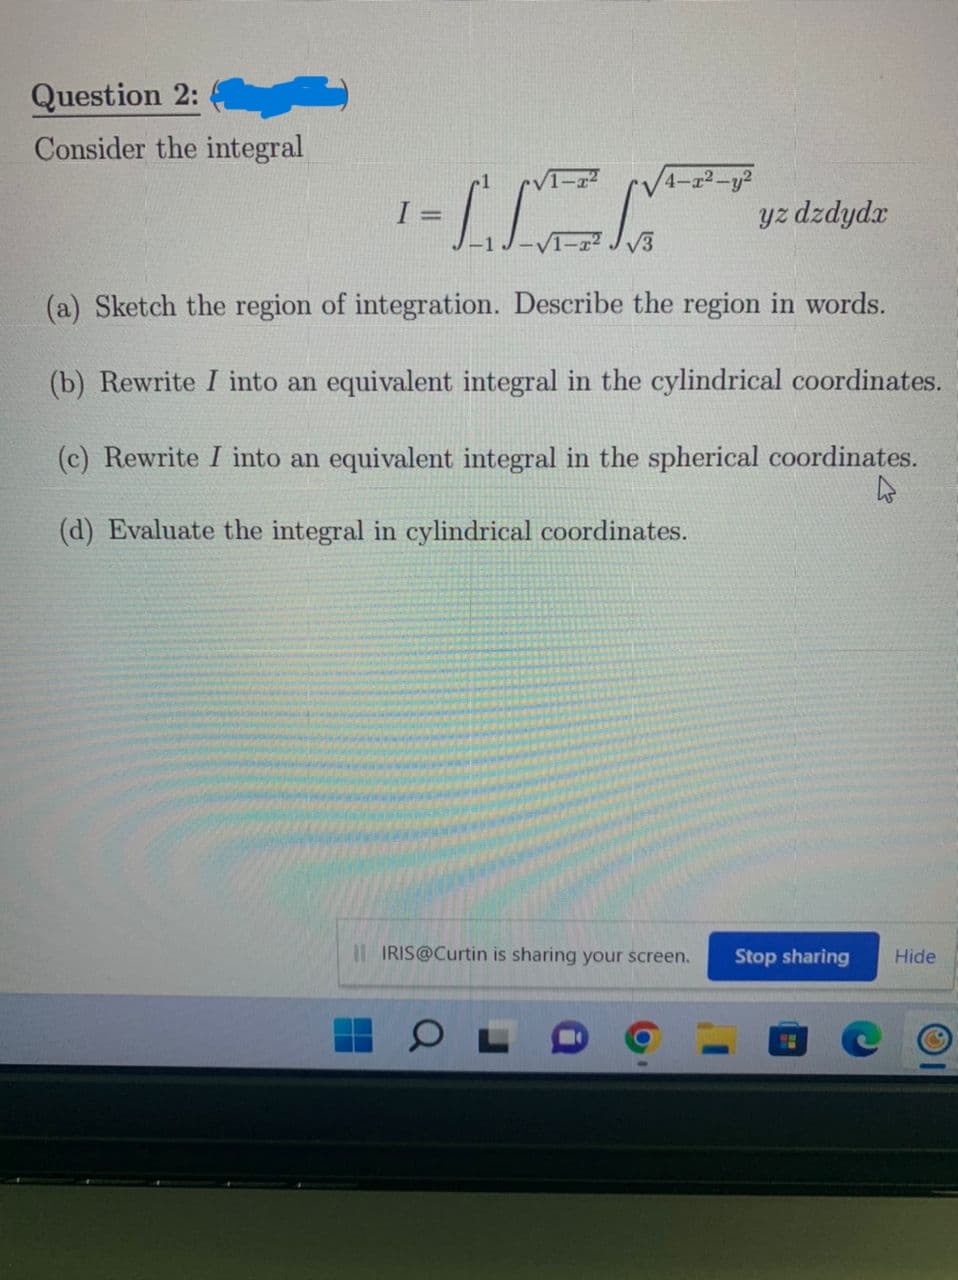 Question 2:
Consider the integral
I =
-IK
yz dzdydx
(a) Sketch the region of integration. Describe the region in words.
(b) Rewrite I into an equivalent integral in the cylindrical coordinates.
(c) Rewrite I into an equivalent integral in the spherical coordinates.
(d) Evaluate the integral in cylindrical coordinates.
4
II IRIS@Curtin is sharing your screen.
Stop sharing Hide
O
√√4-x²-y²